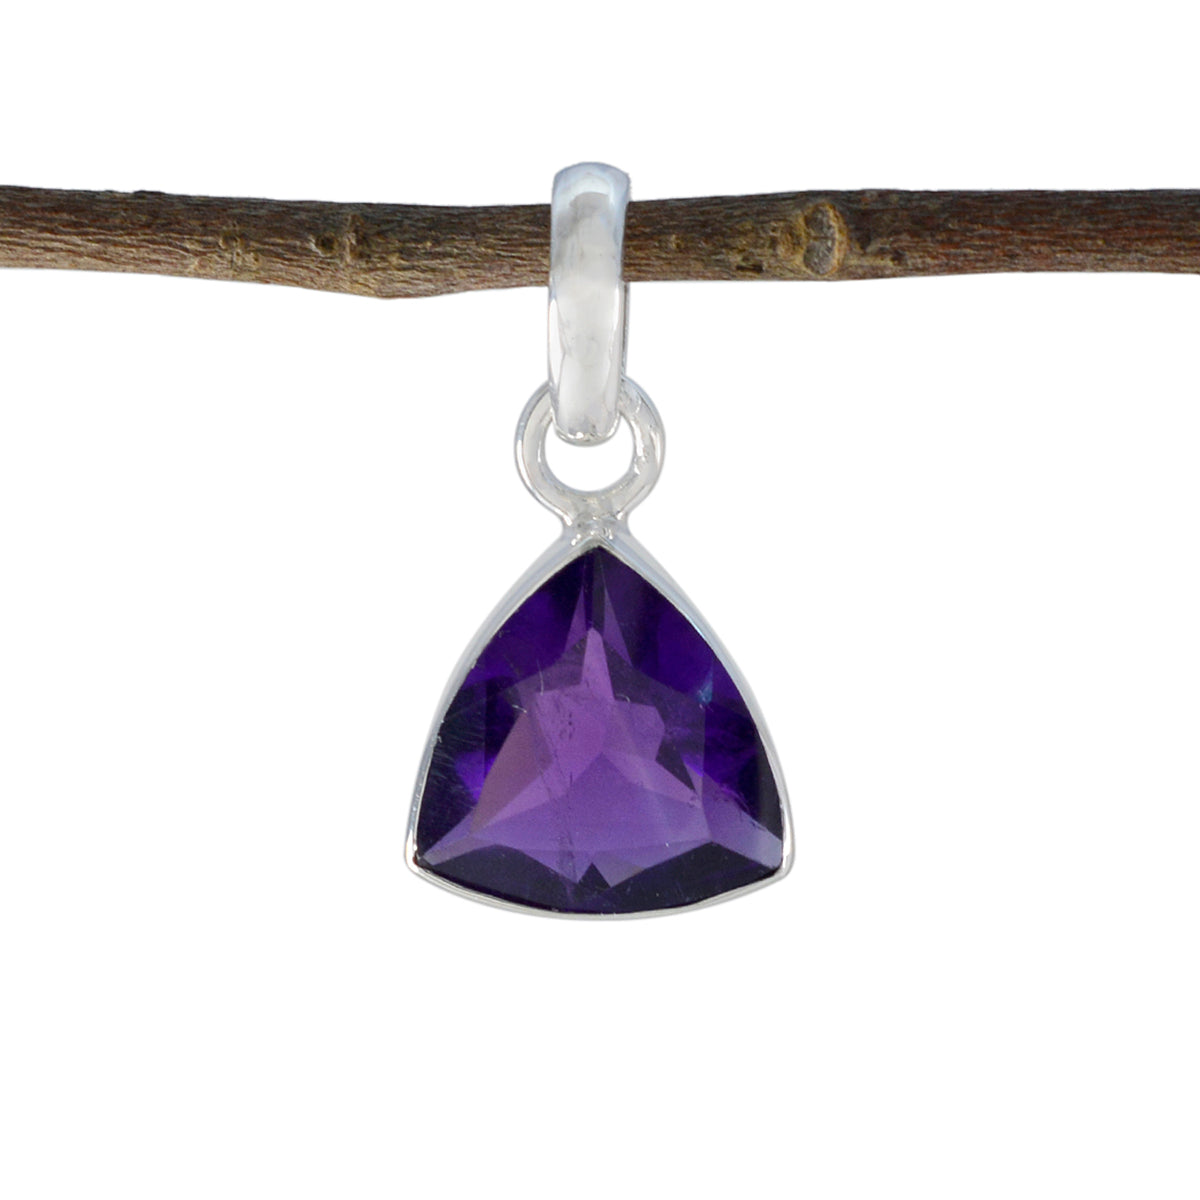 Riyo Gorgeous Gems Trillion Faceted Purple Amethyst Solid Silver Pendant Gift For Good Friday